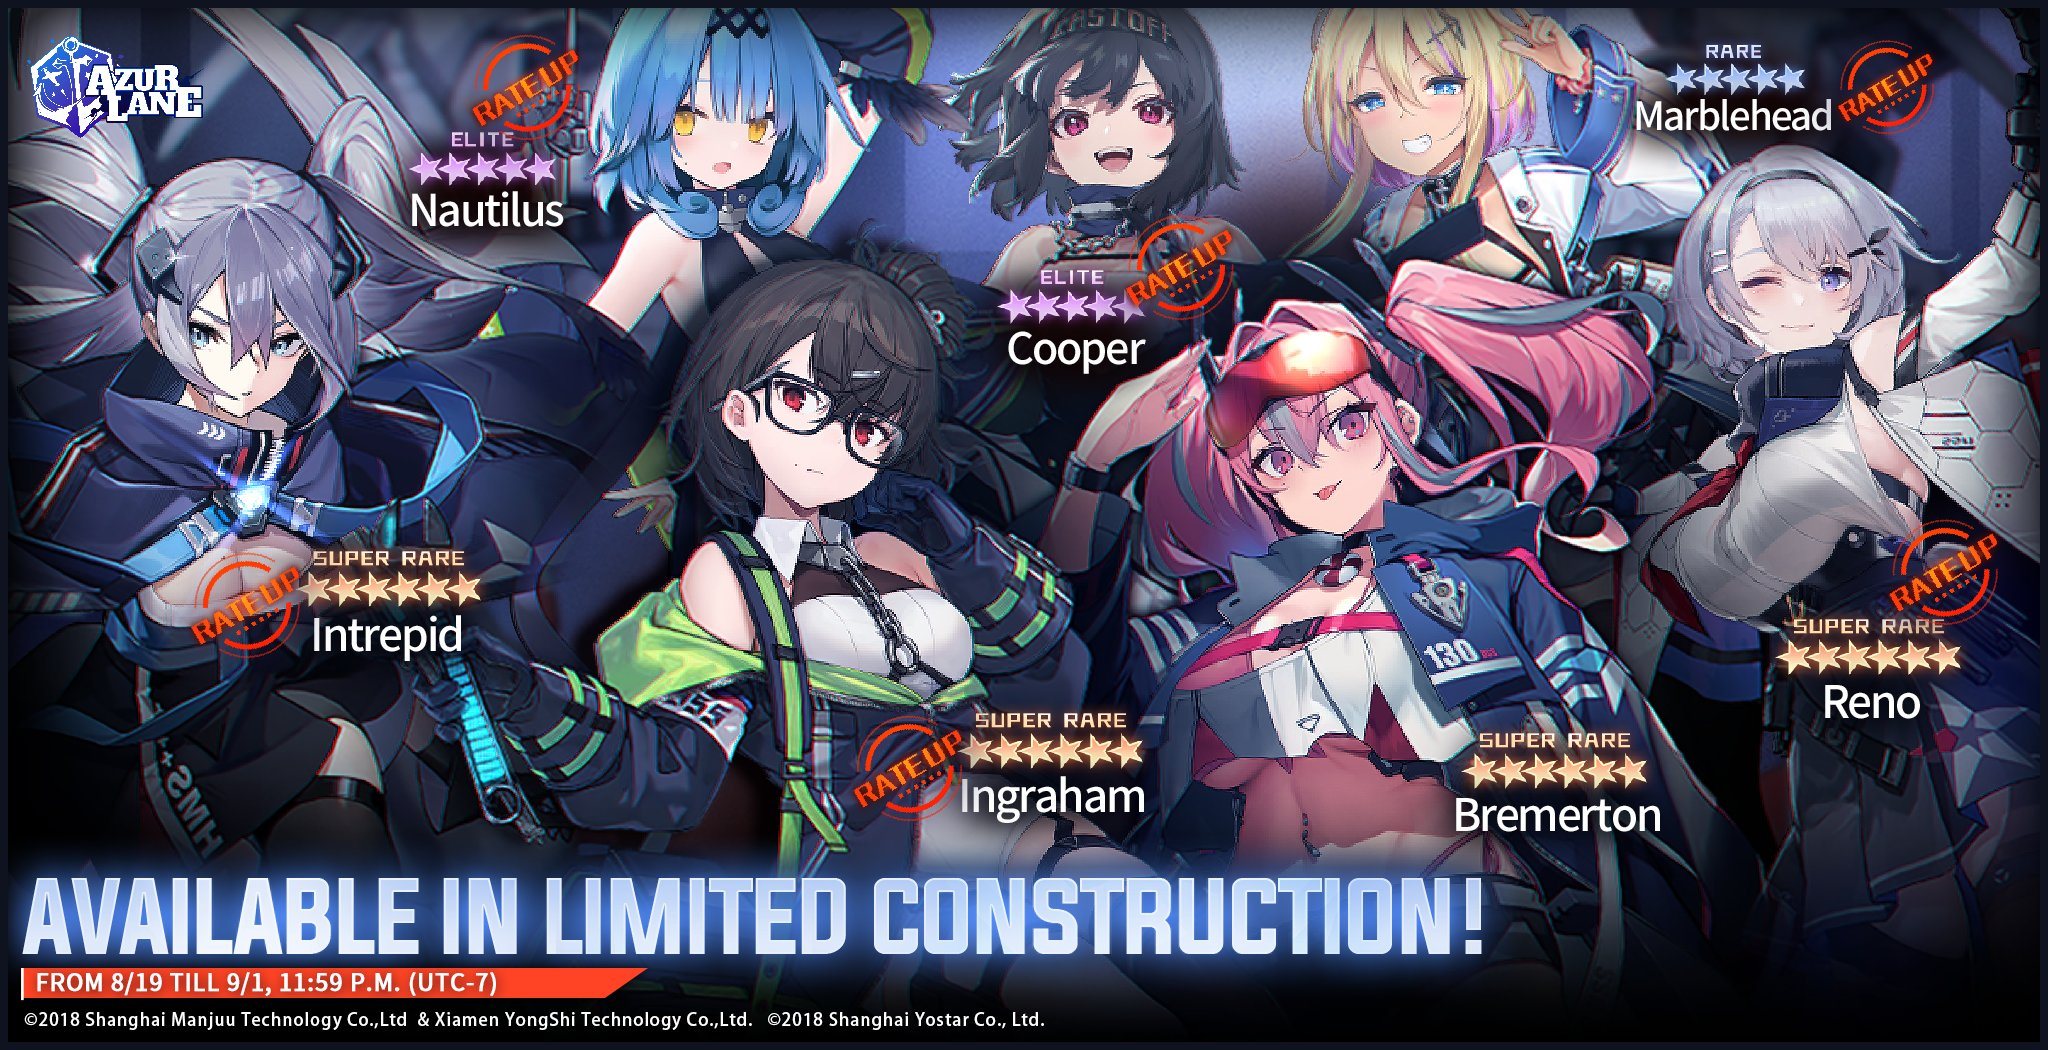 Azur Lane August Update: The Microlayer Medley Event Returns